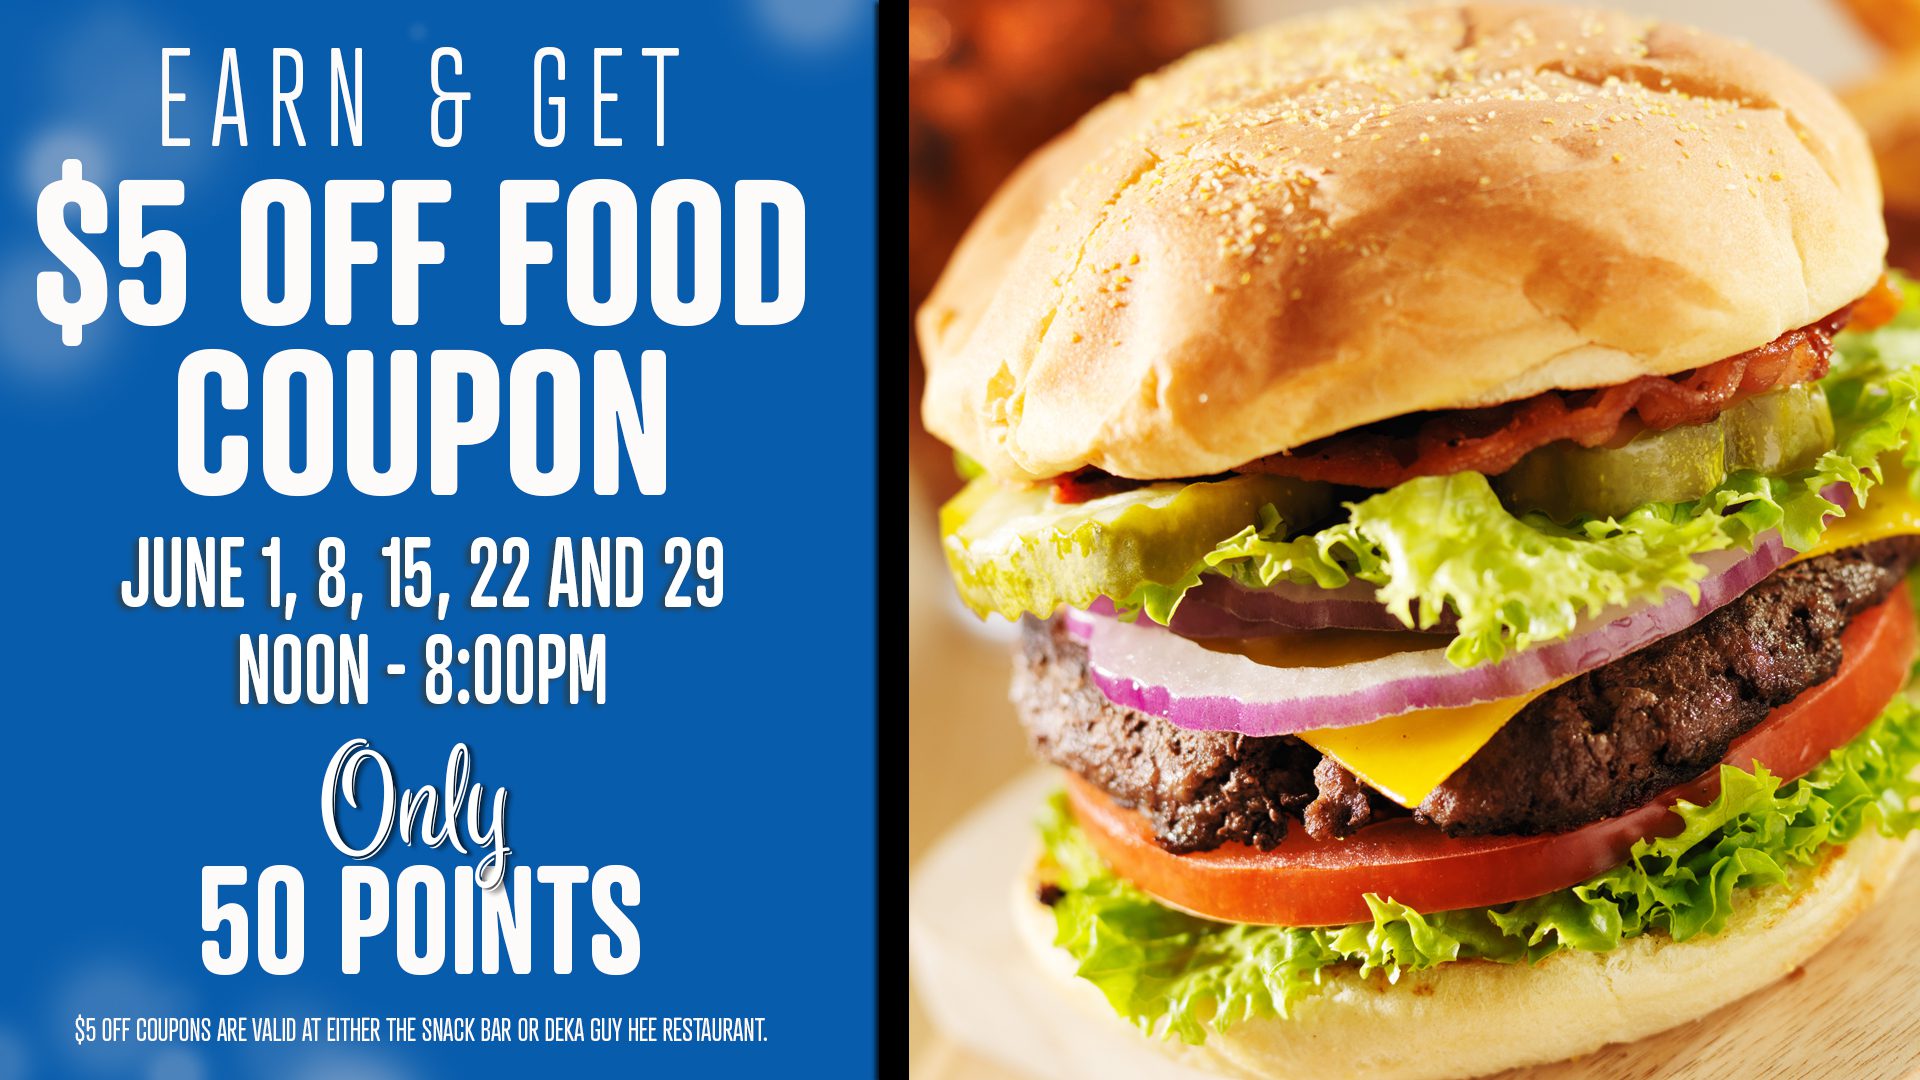 Promotional flyer offering a $5 off food coupon for select dates with a photo of a hamburger.